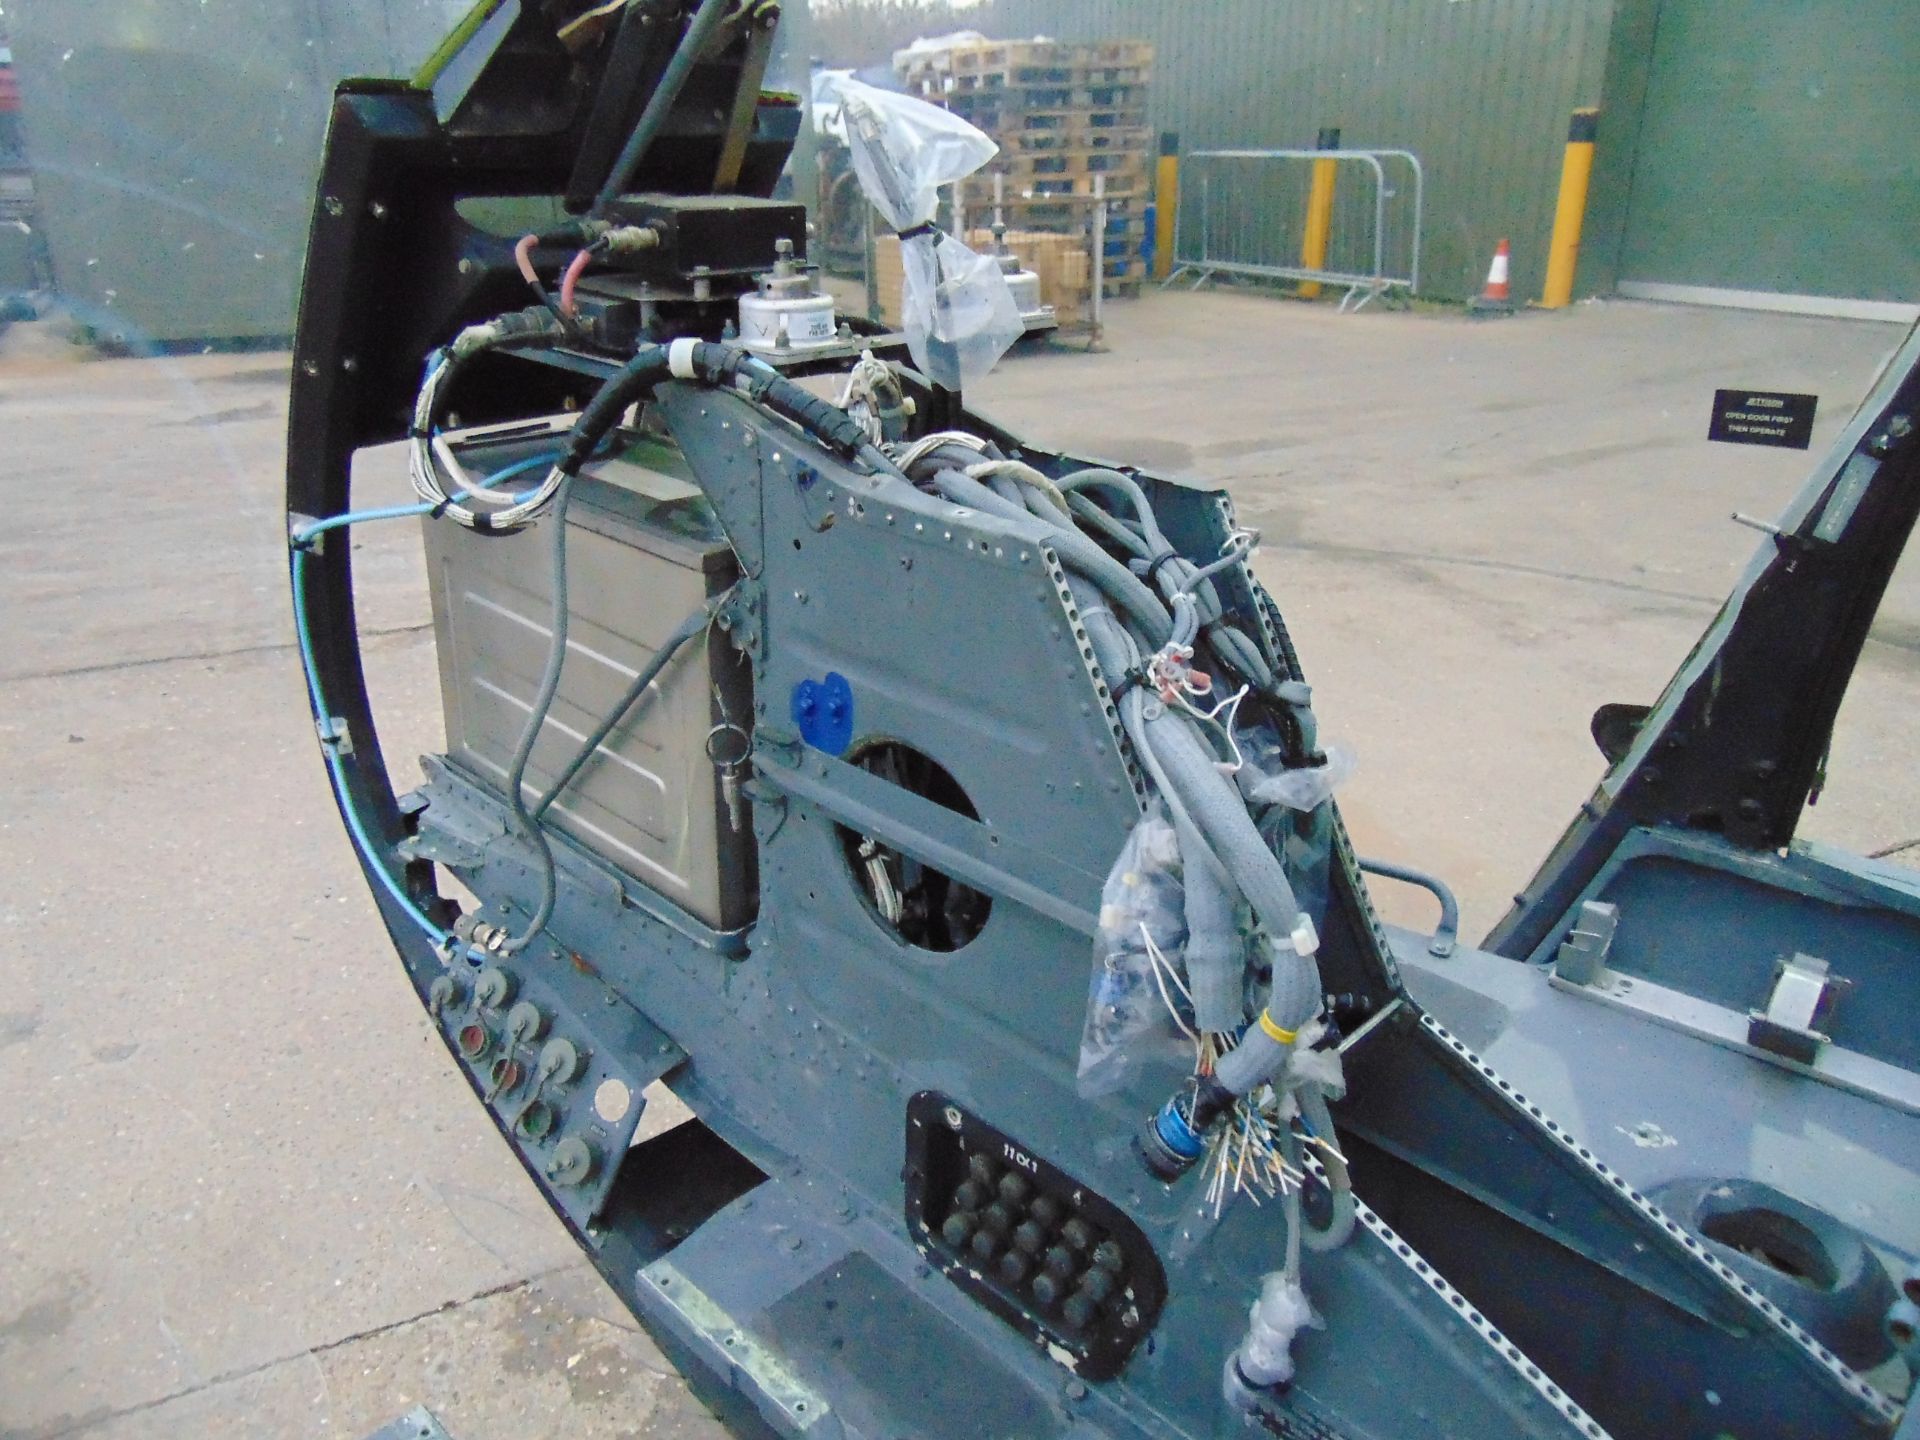 Gazelle AH 1 Turbine Helicopter Airframe (TAIL NUMBER XX403) - Image 26 of 28